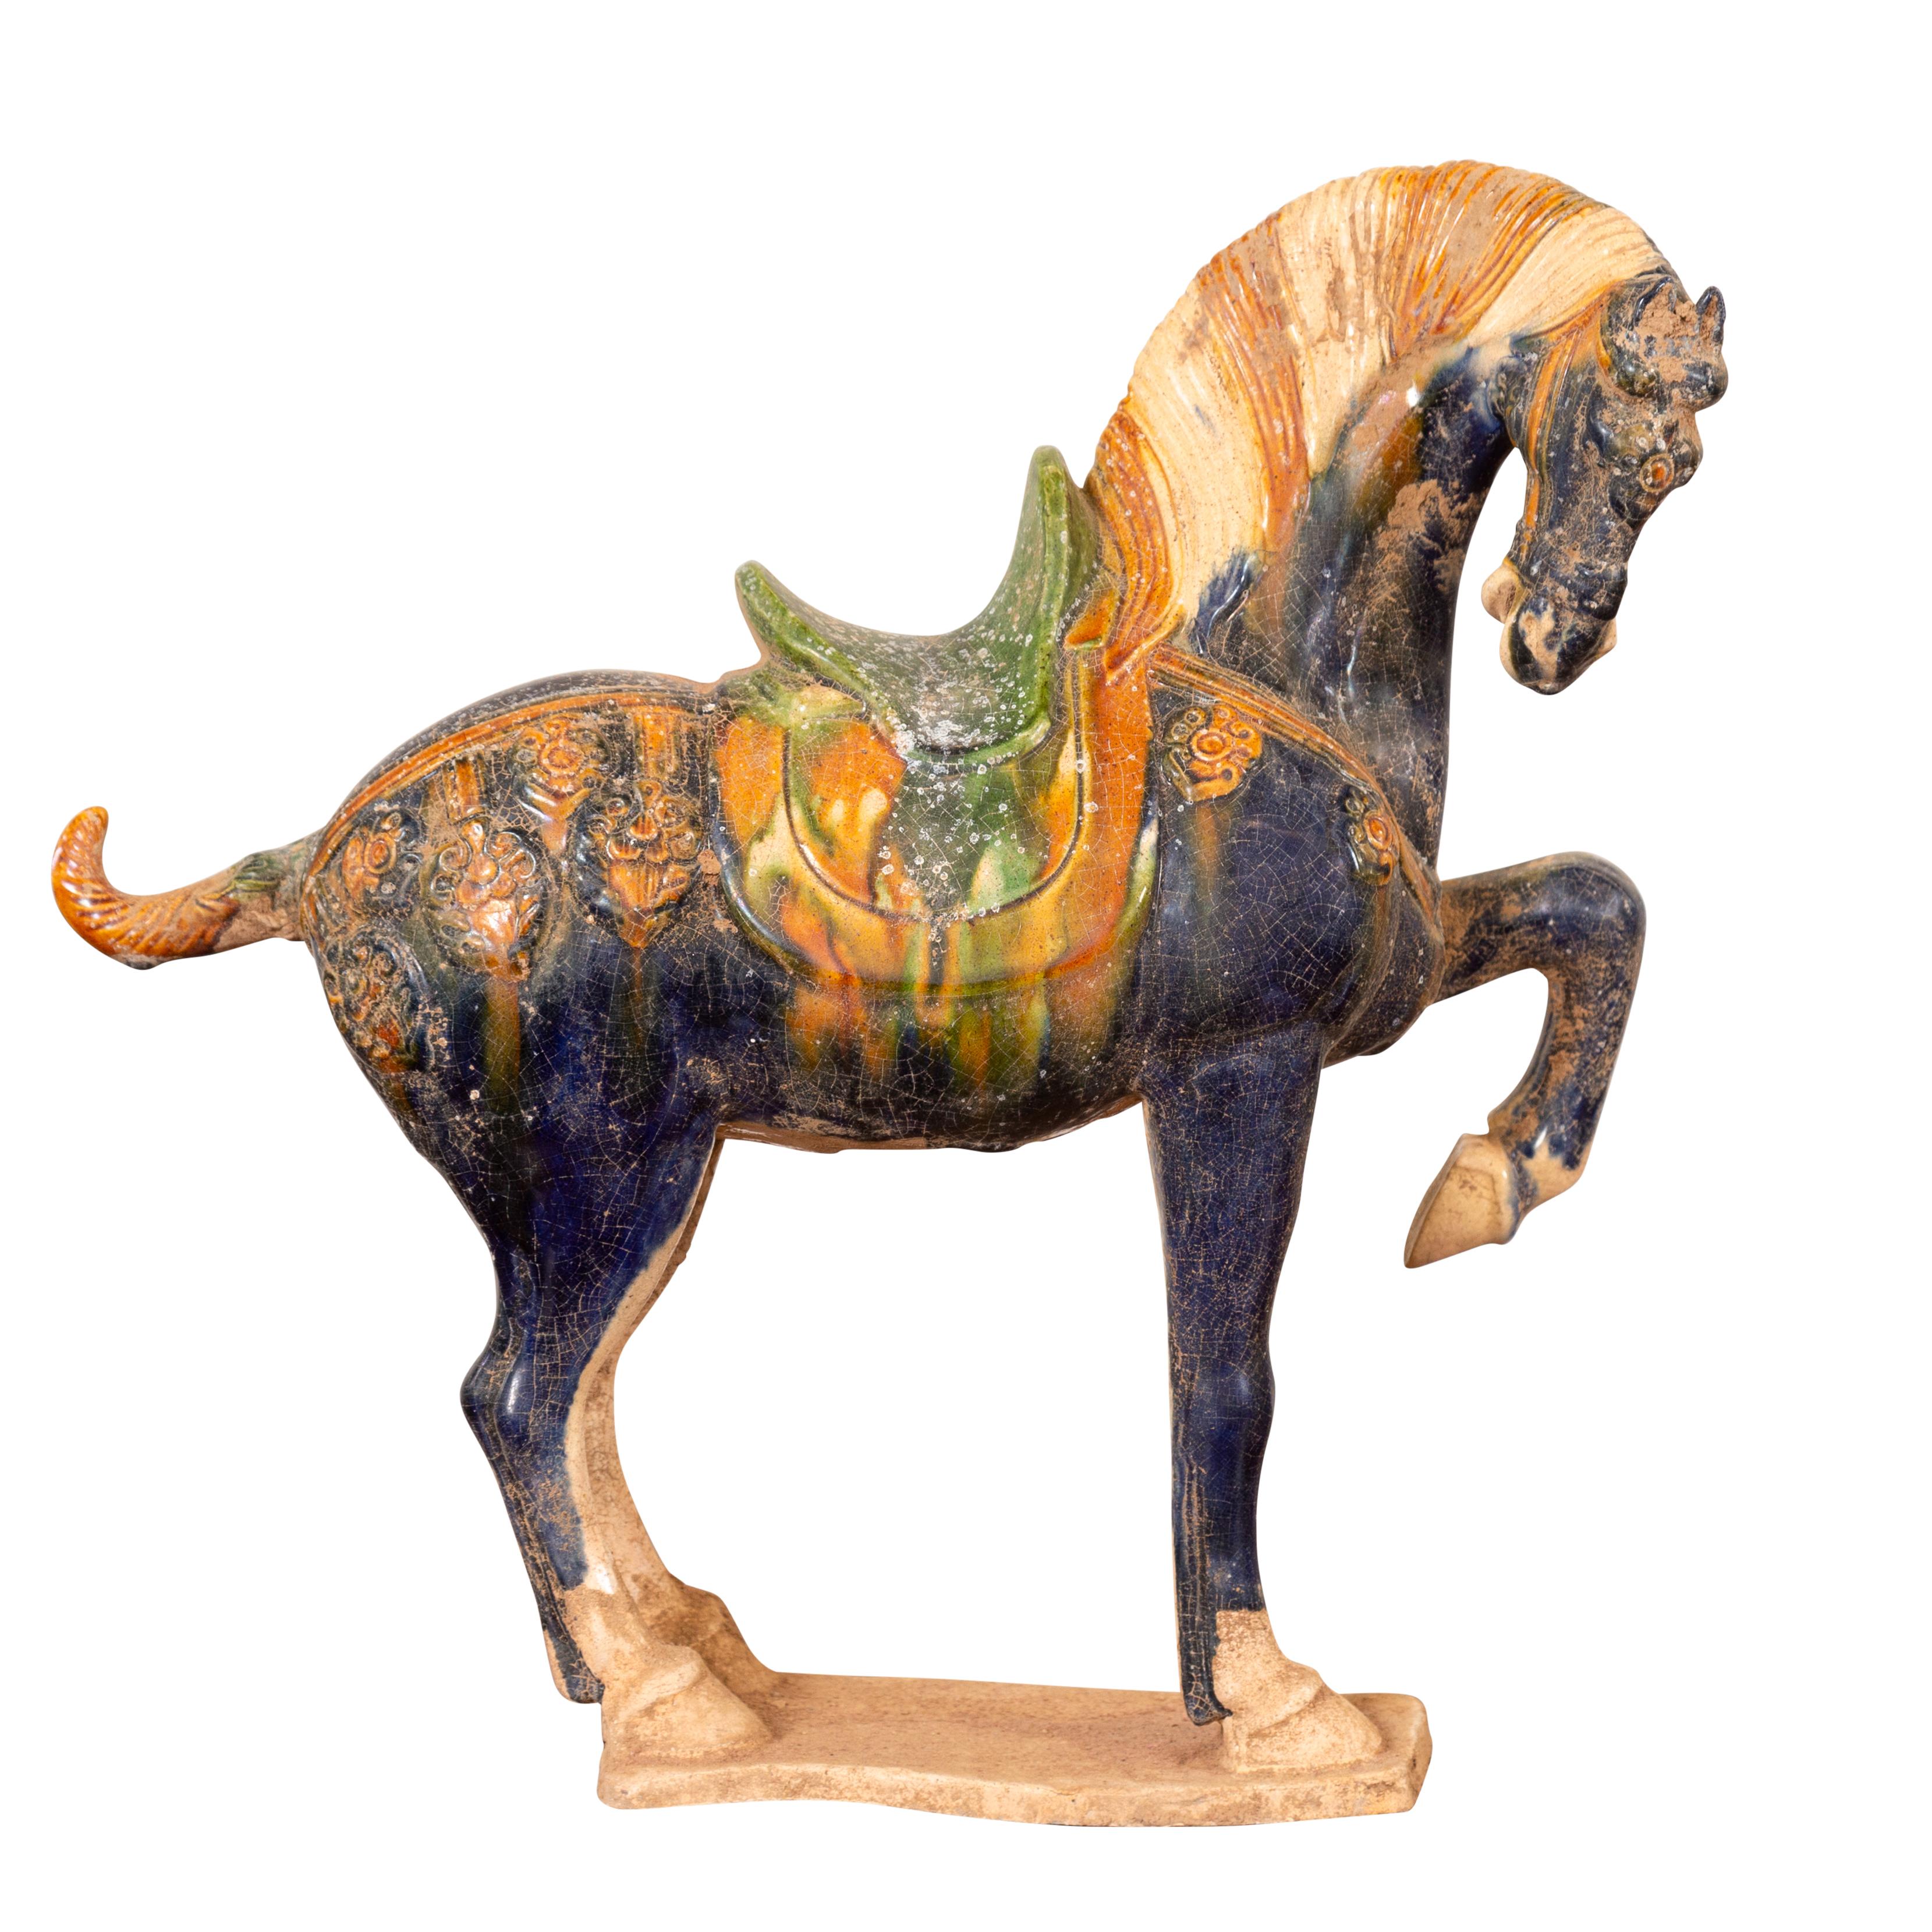 A Chinese Ming dynasty style glazed terracotta prancing horse figure from the 20th century with polychrome finish. Crafted in the Ming style, this small terracotta prancing horse attracts our attention with its graceful stance and tricolor glazed